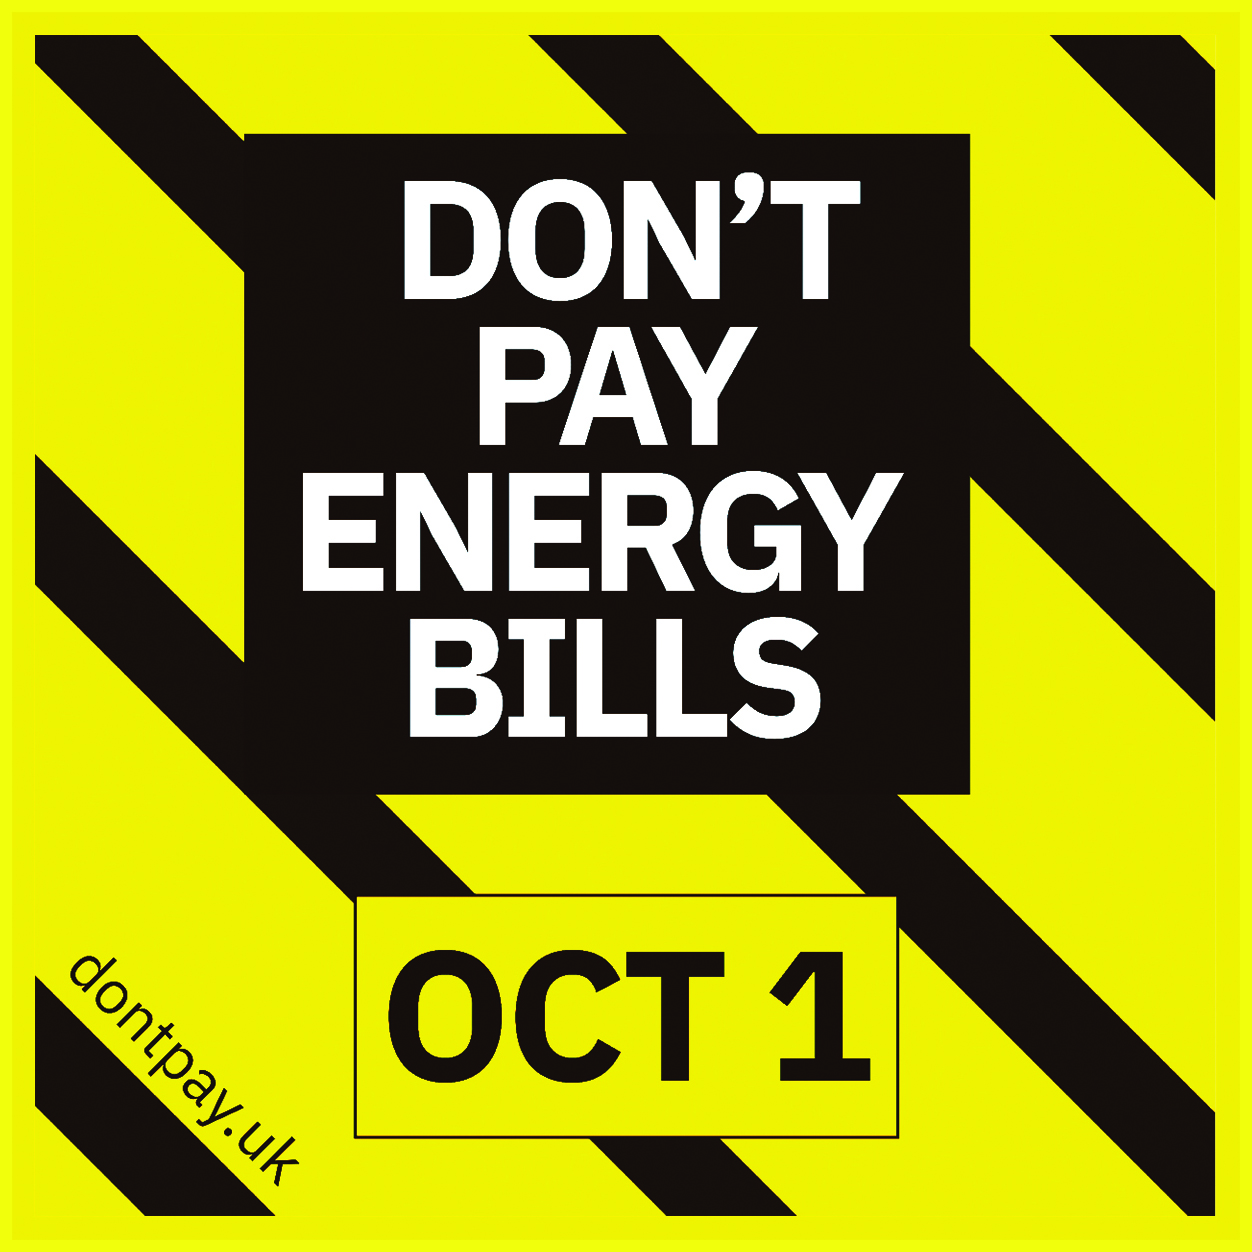 As support grows for Don't Pay UK, some are warning that there could be risks to cancelling your energy bills in October